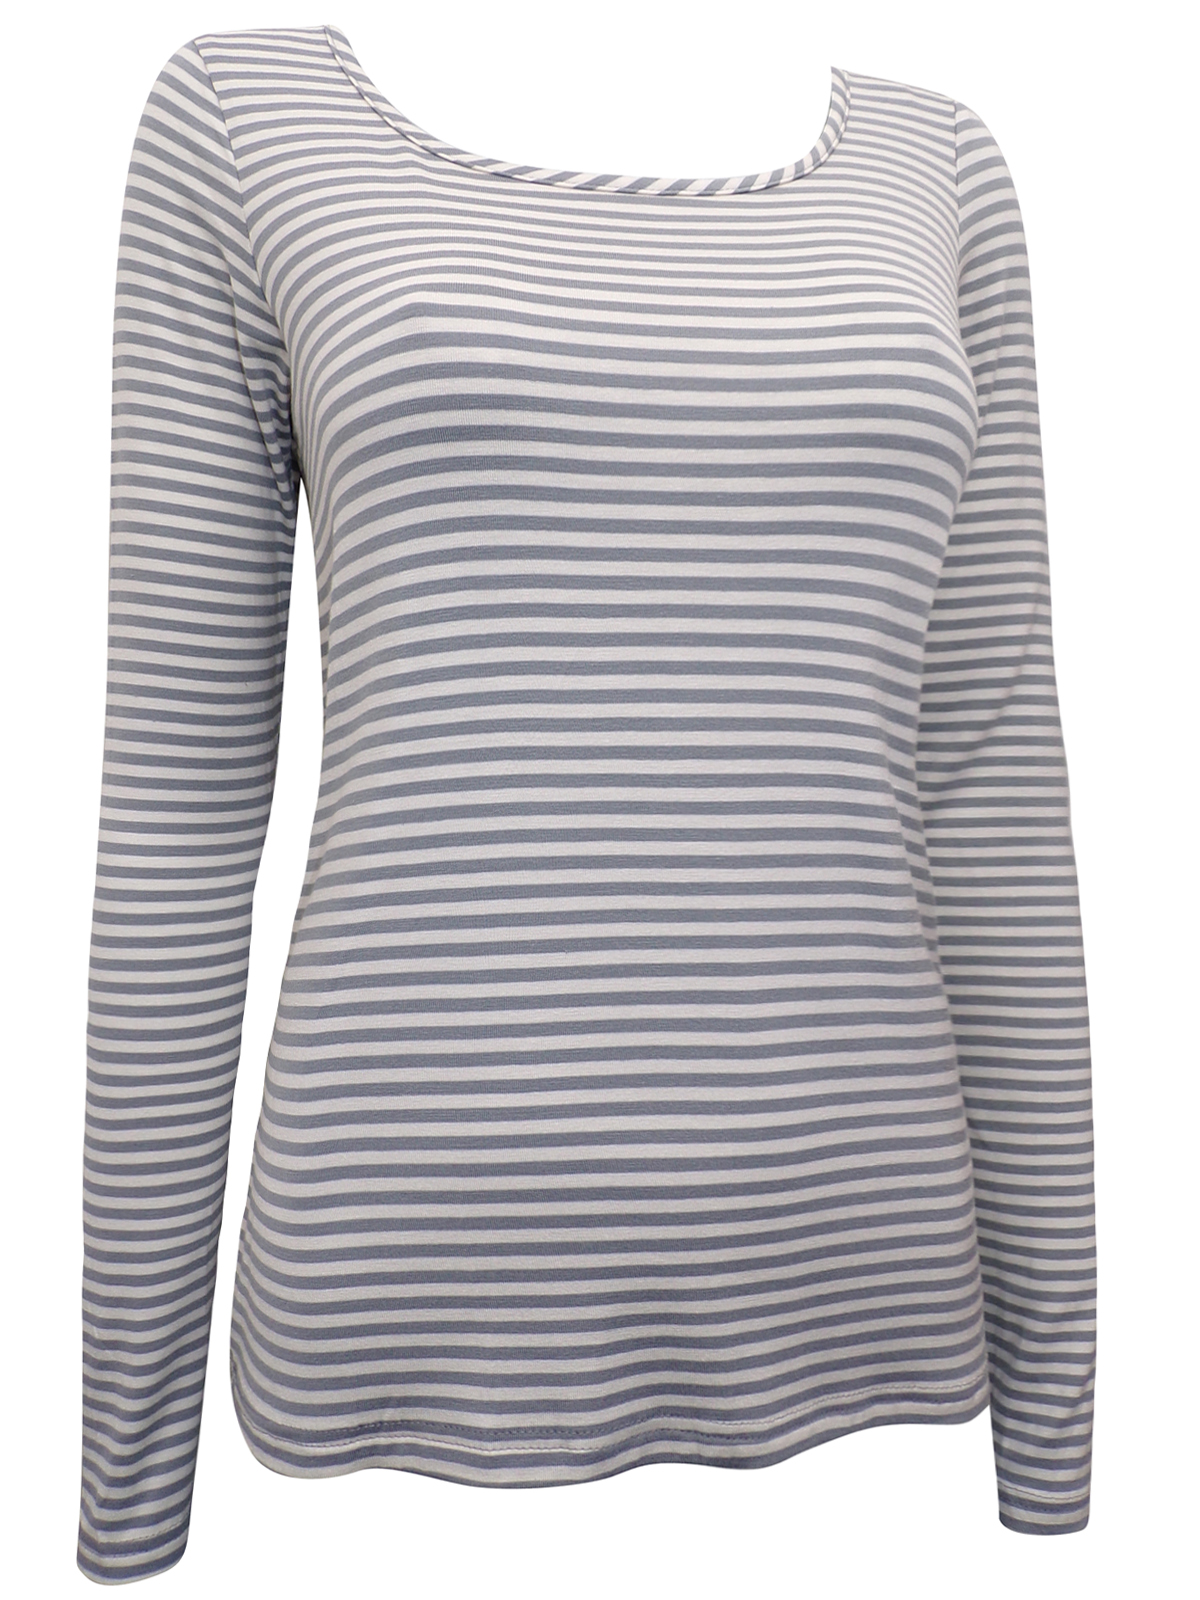 Pure Collection - - PureCollection Light GREY Long Sleeve Striped ...